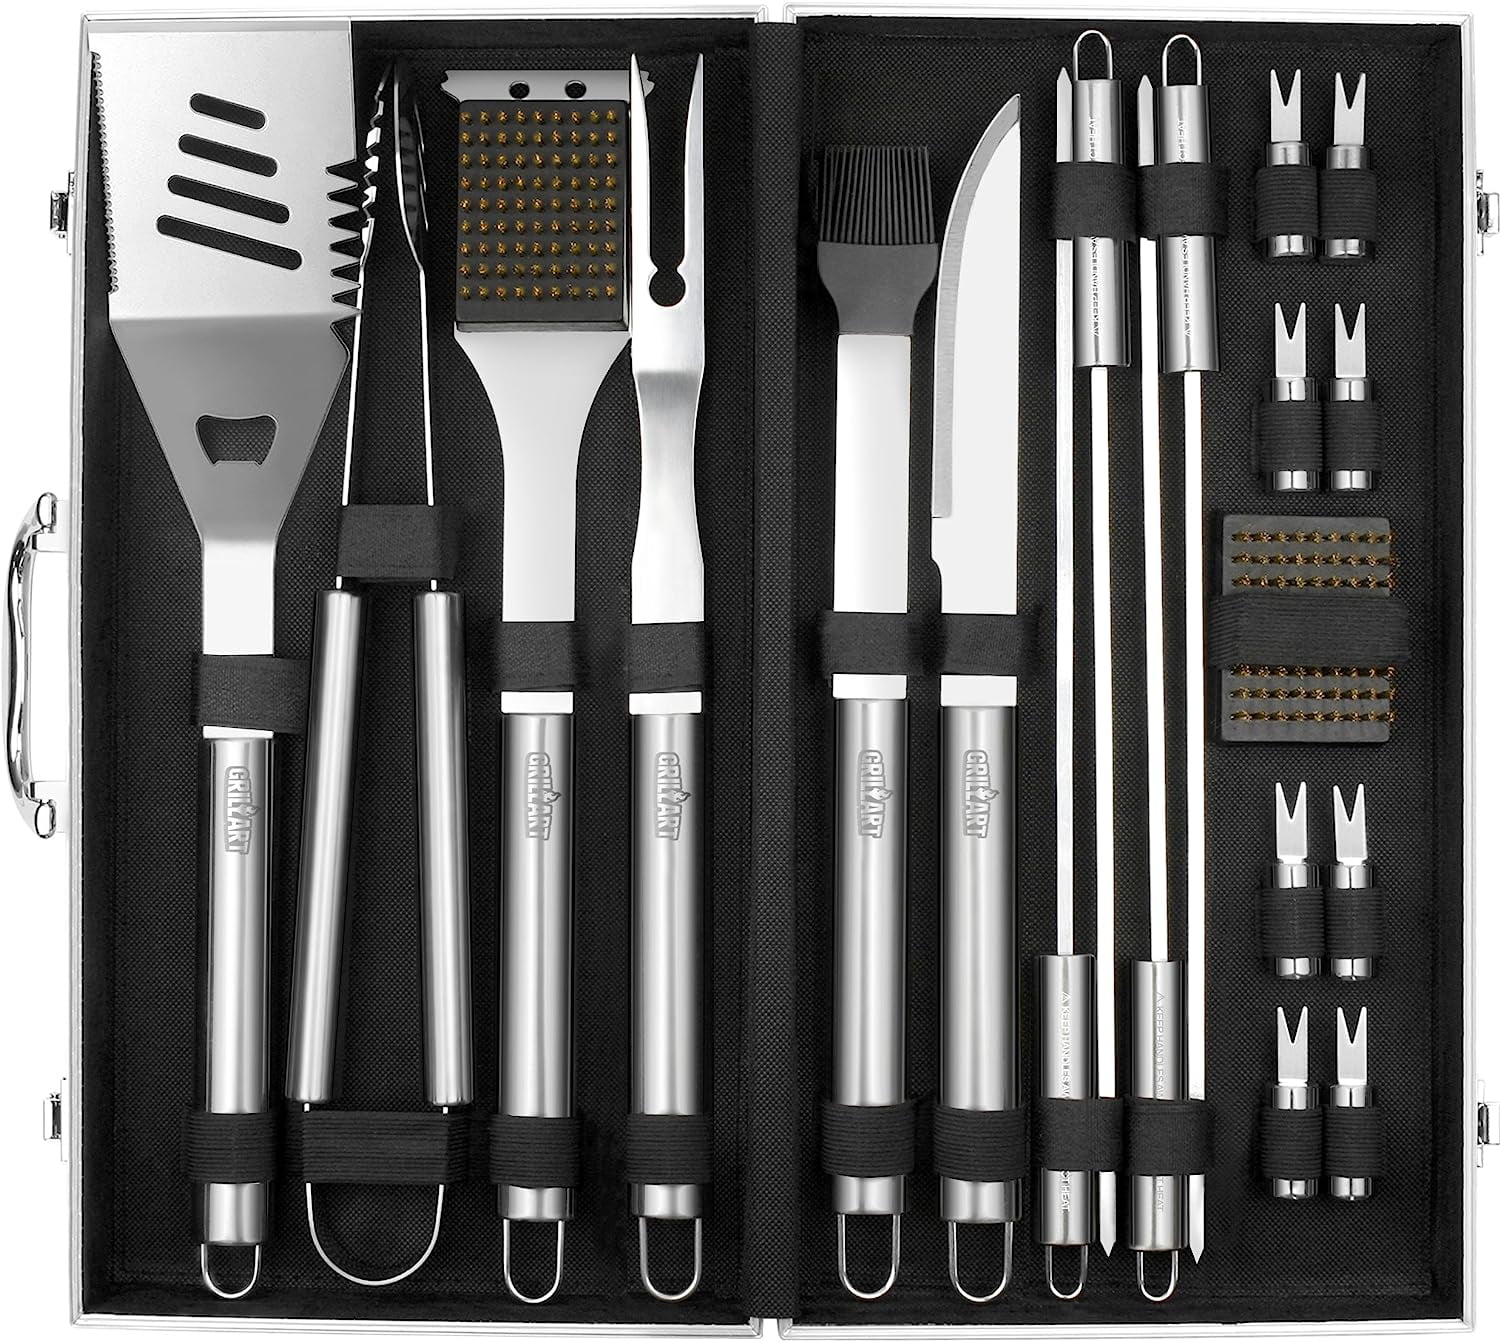 Grill Utensils Set,BBQ Grilling Accessories, Grill Set Gifts for Men Grill  Tools, MUJUZE Barbeque with Apron, Stainless Steel Grill Kit Set Gifts for